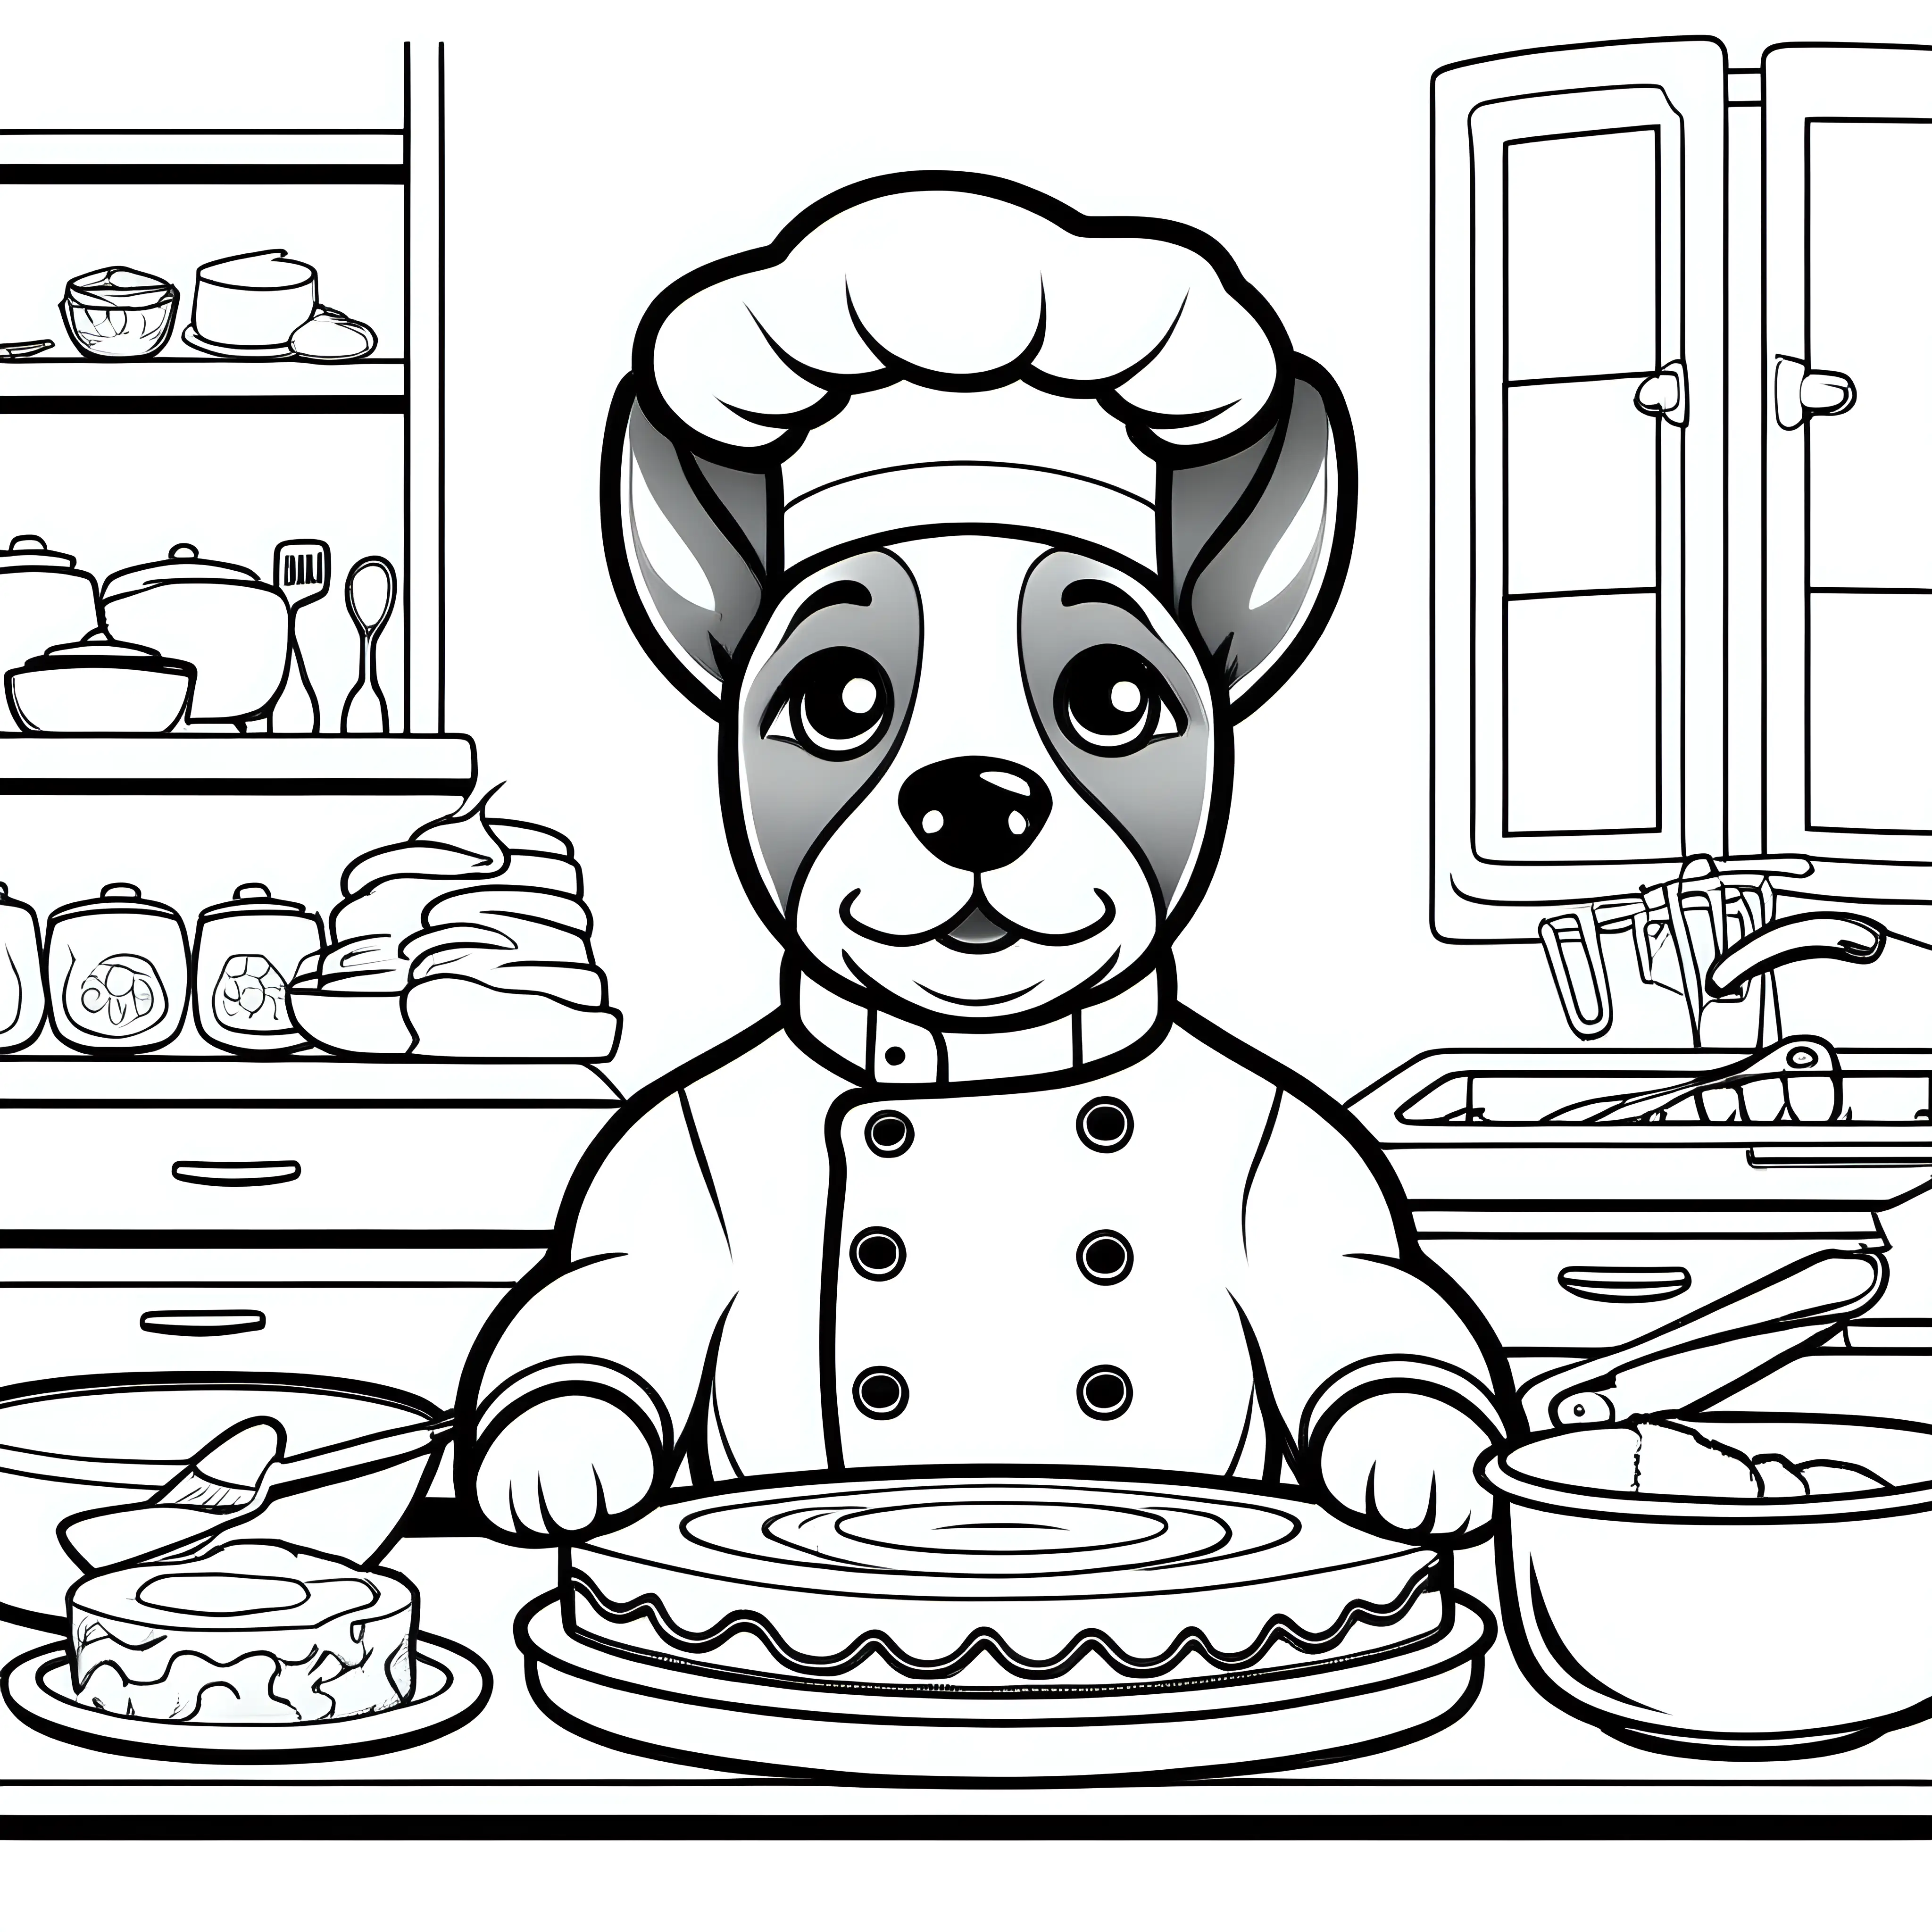 Adorable Dog Chef Baking Cake in Monochrome Coloring Book Style